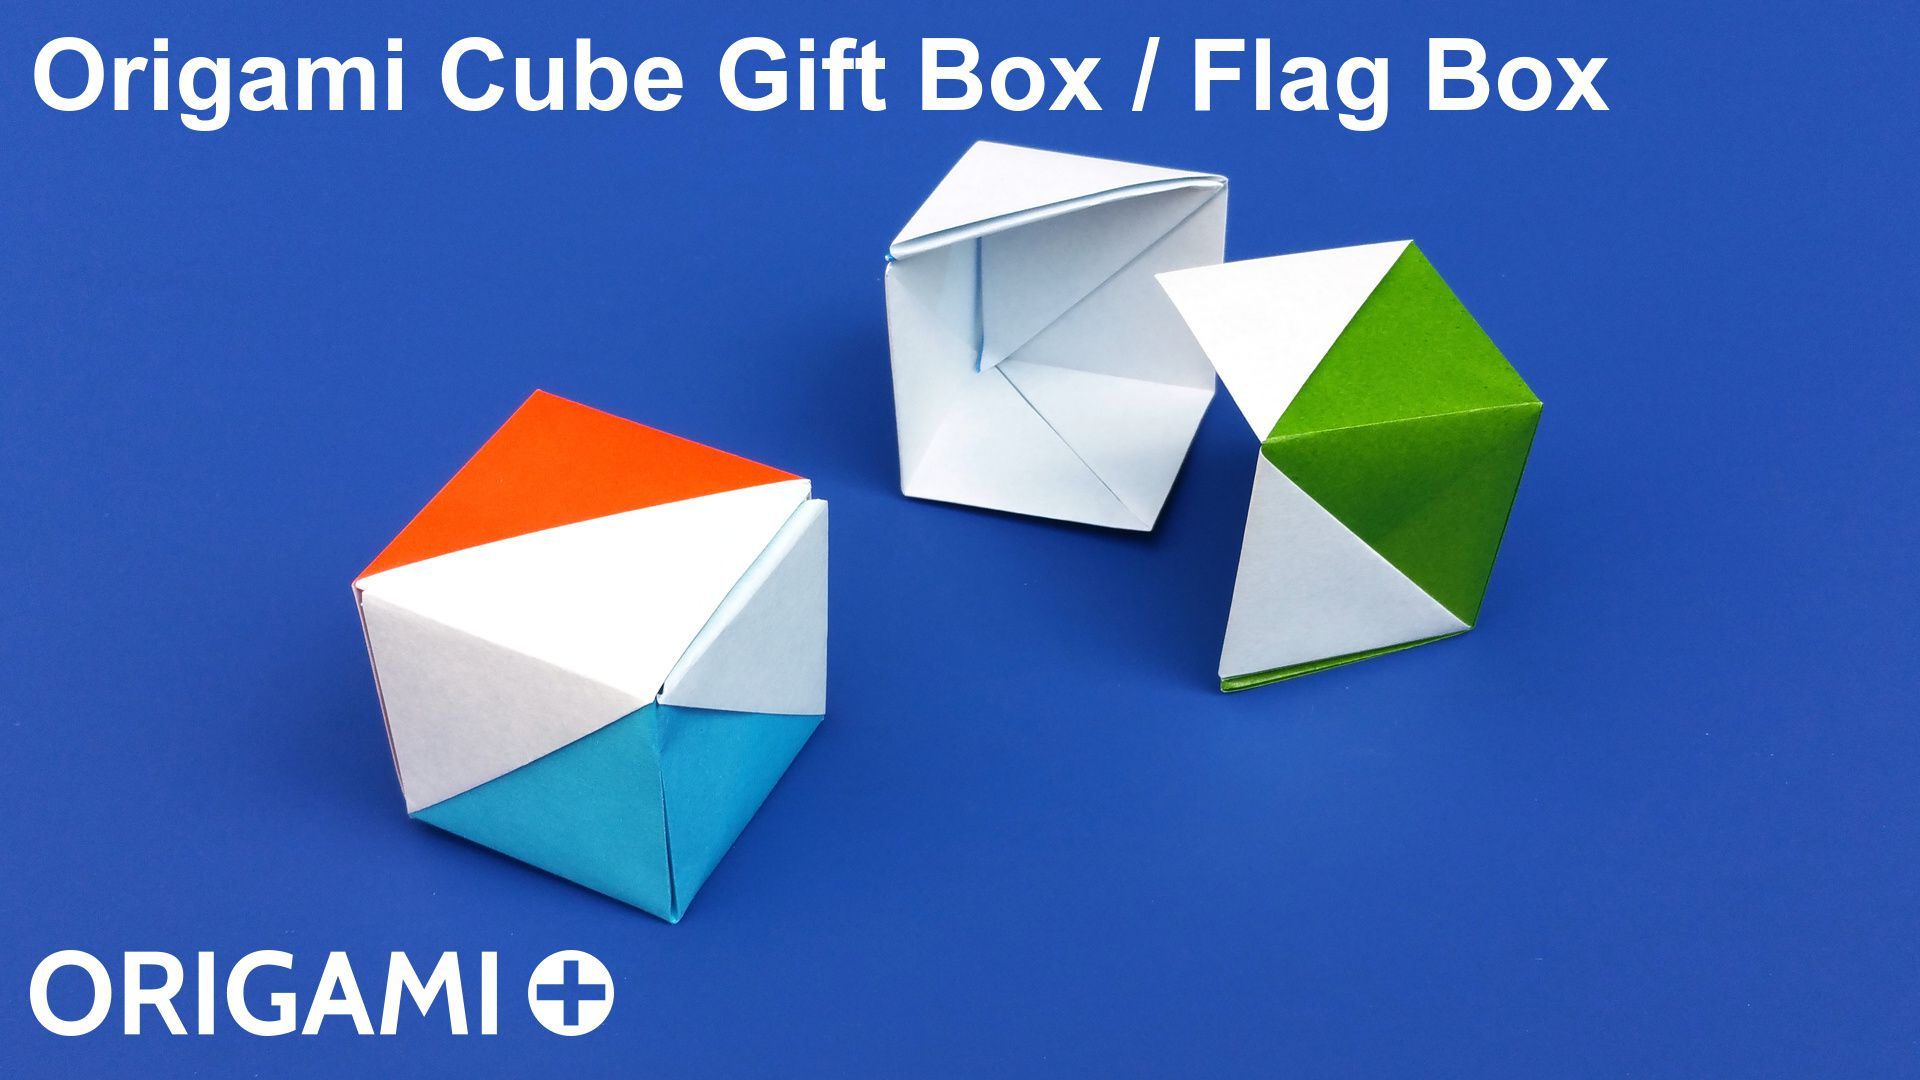 How To Fold Origami Cube Origami Cube Gift Box Flag Box